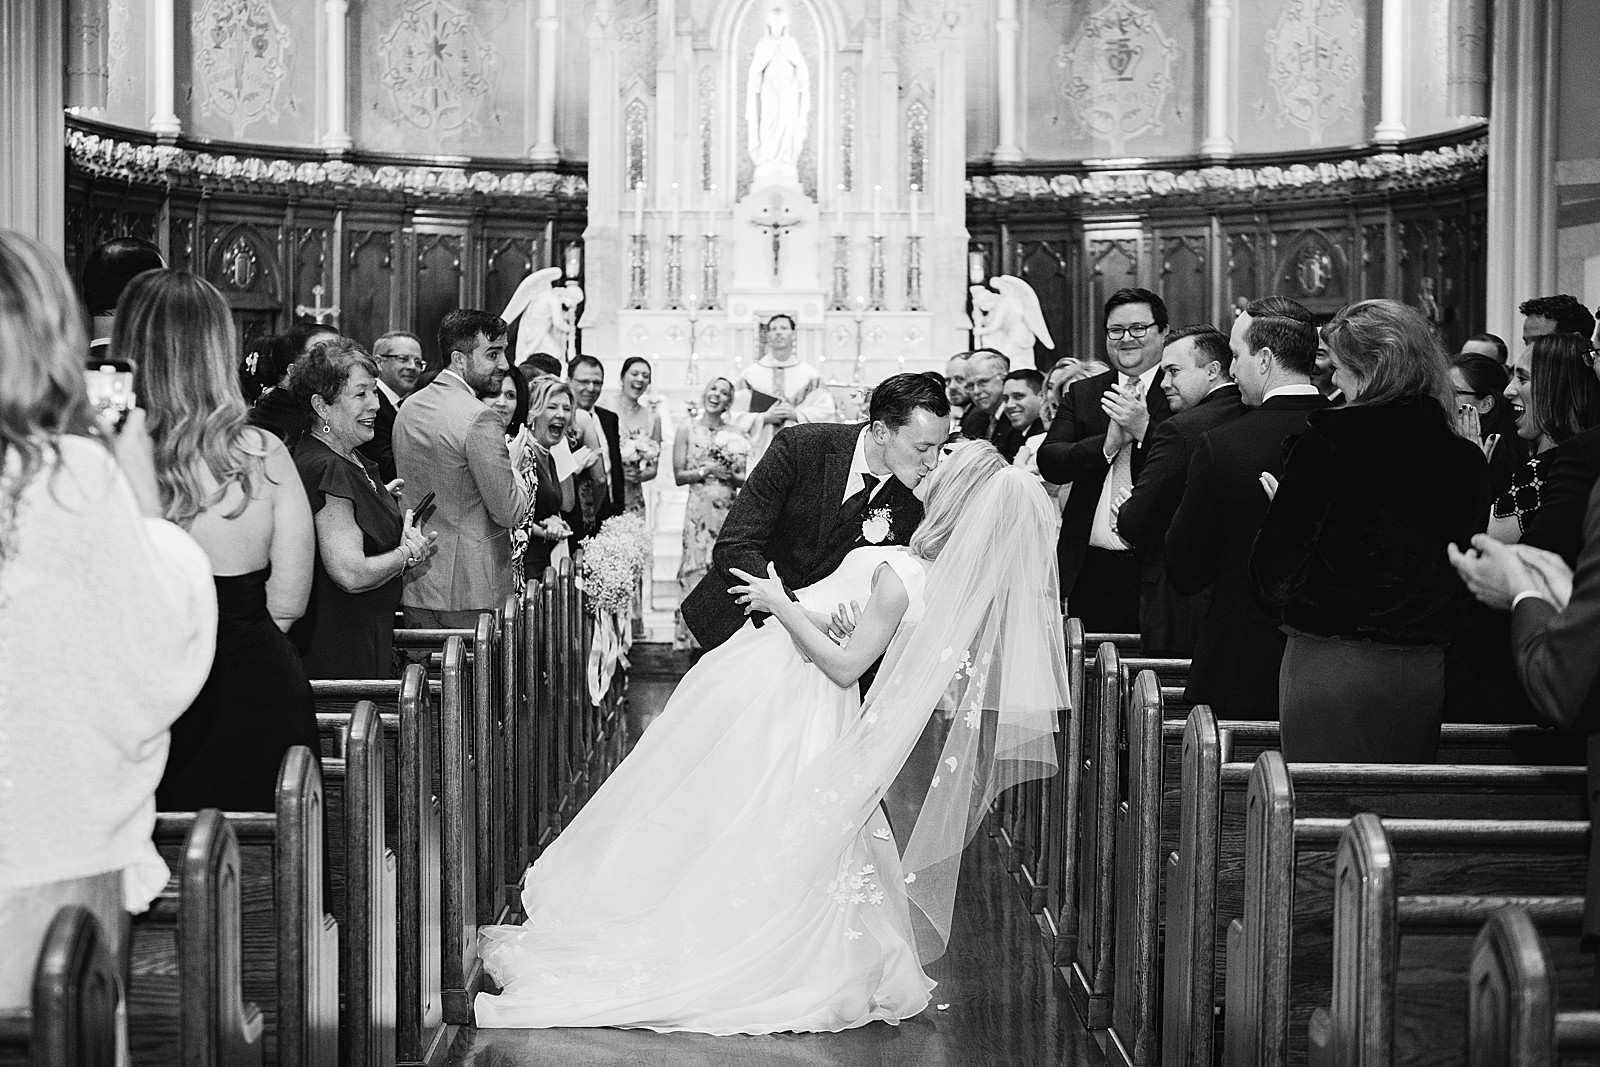 Bride and groom kiss with a dip in the aisle during their recessional before heading to the rest of their rainy Mount Vernon Inn Restaurant wedding.